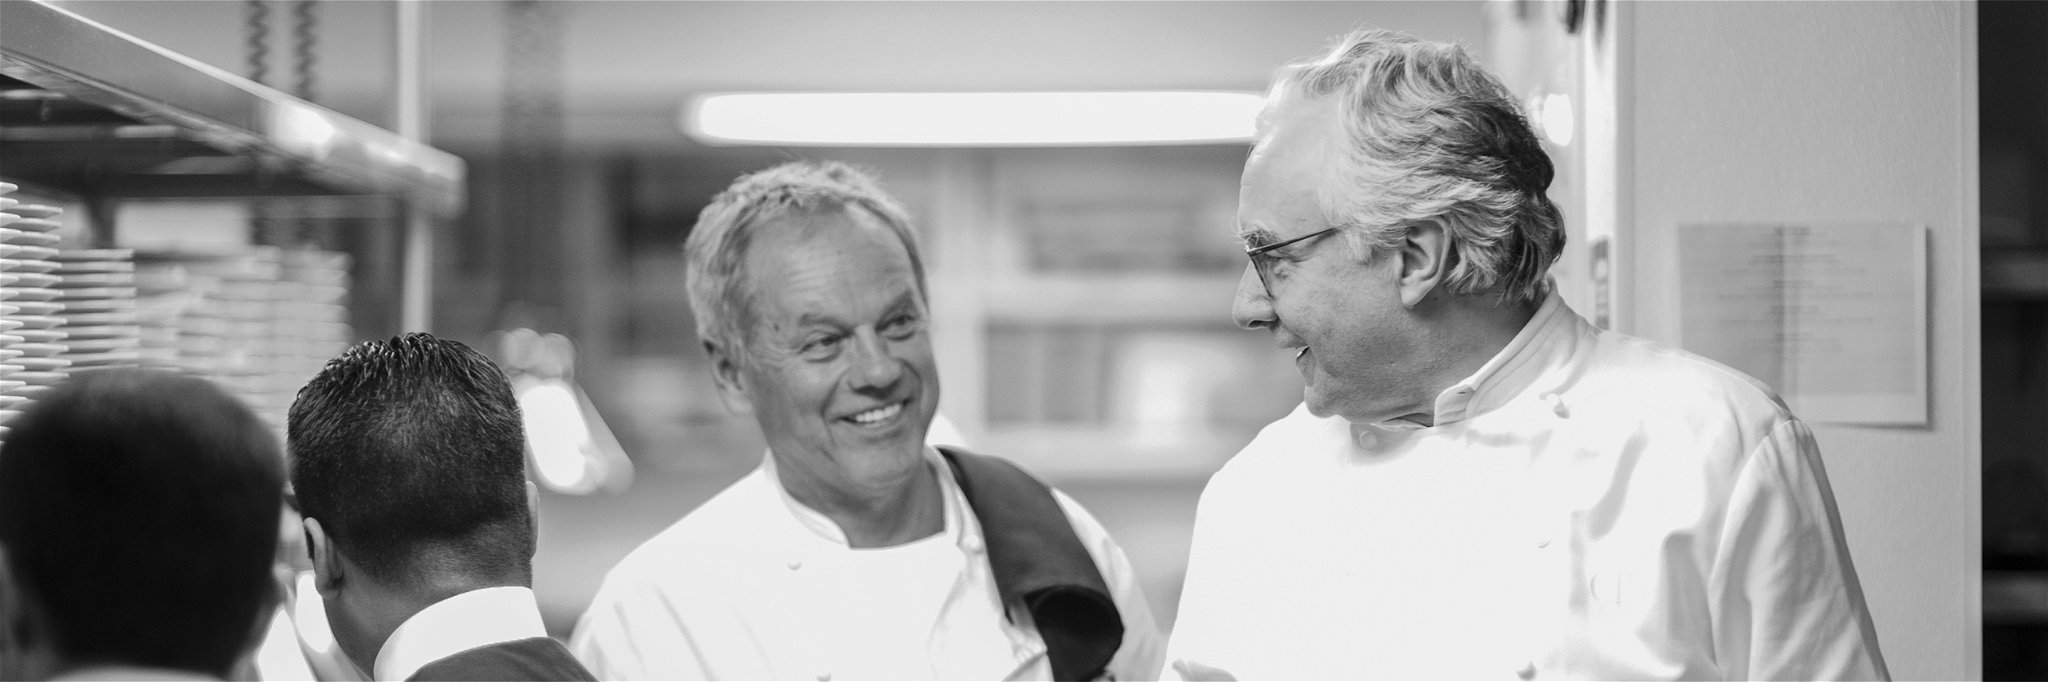 Wolfgang Puck and Alain Ducasse